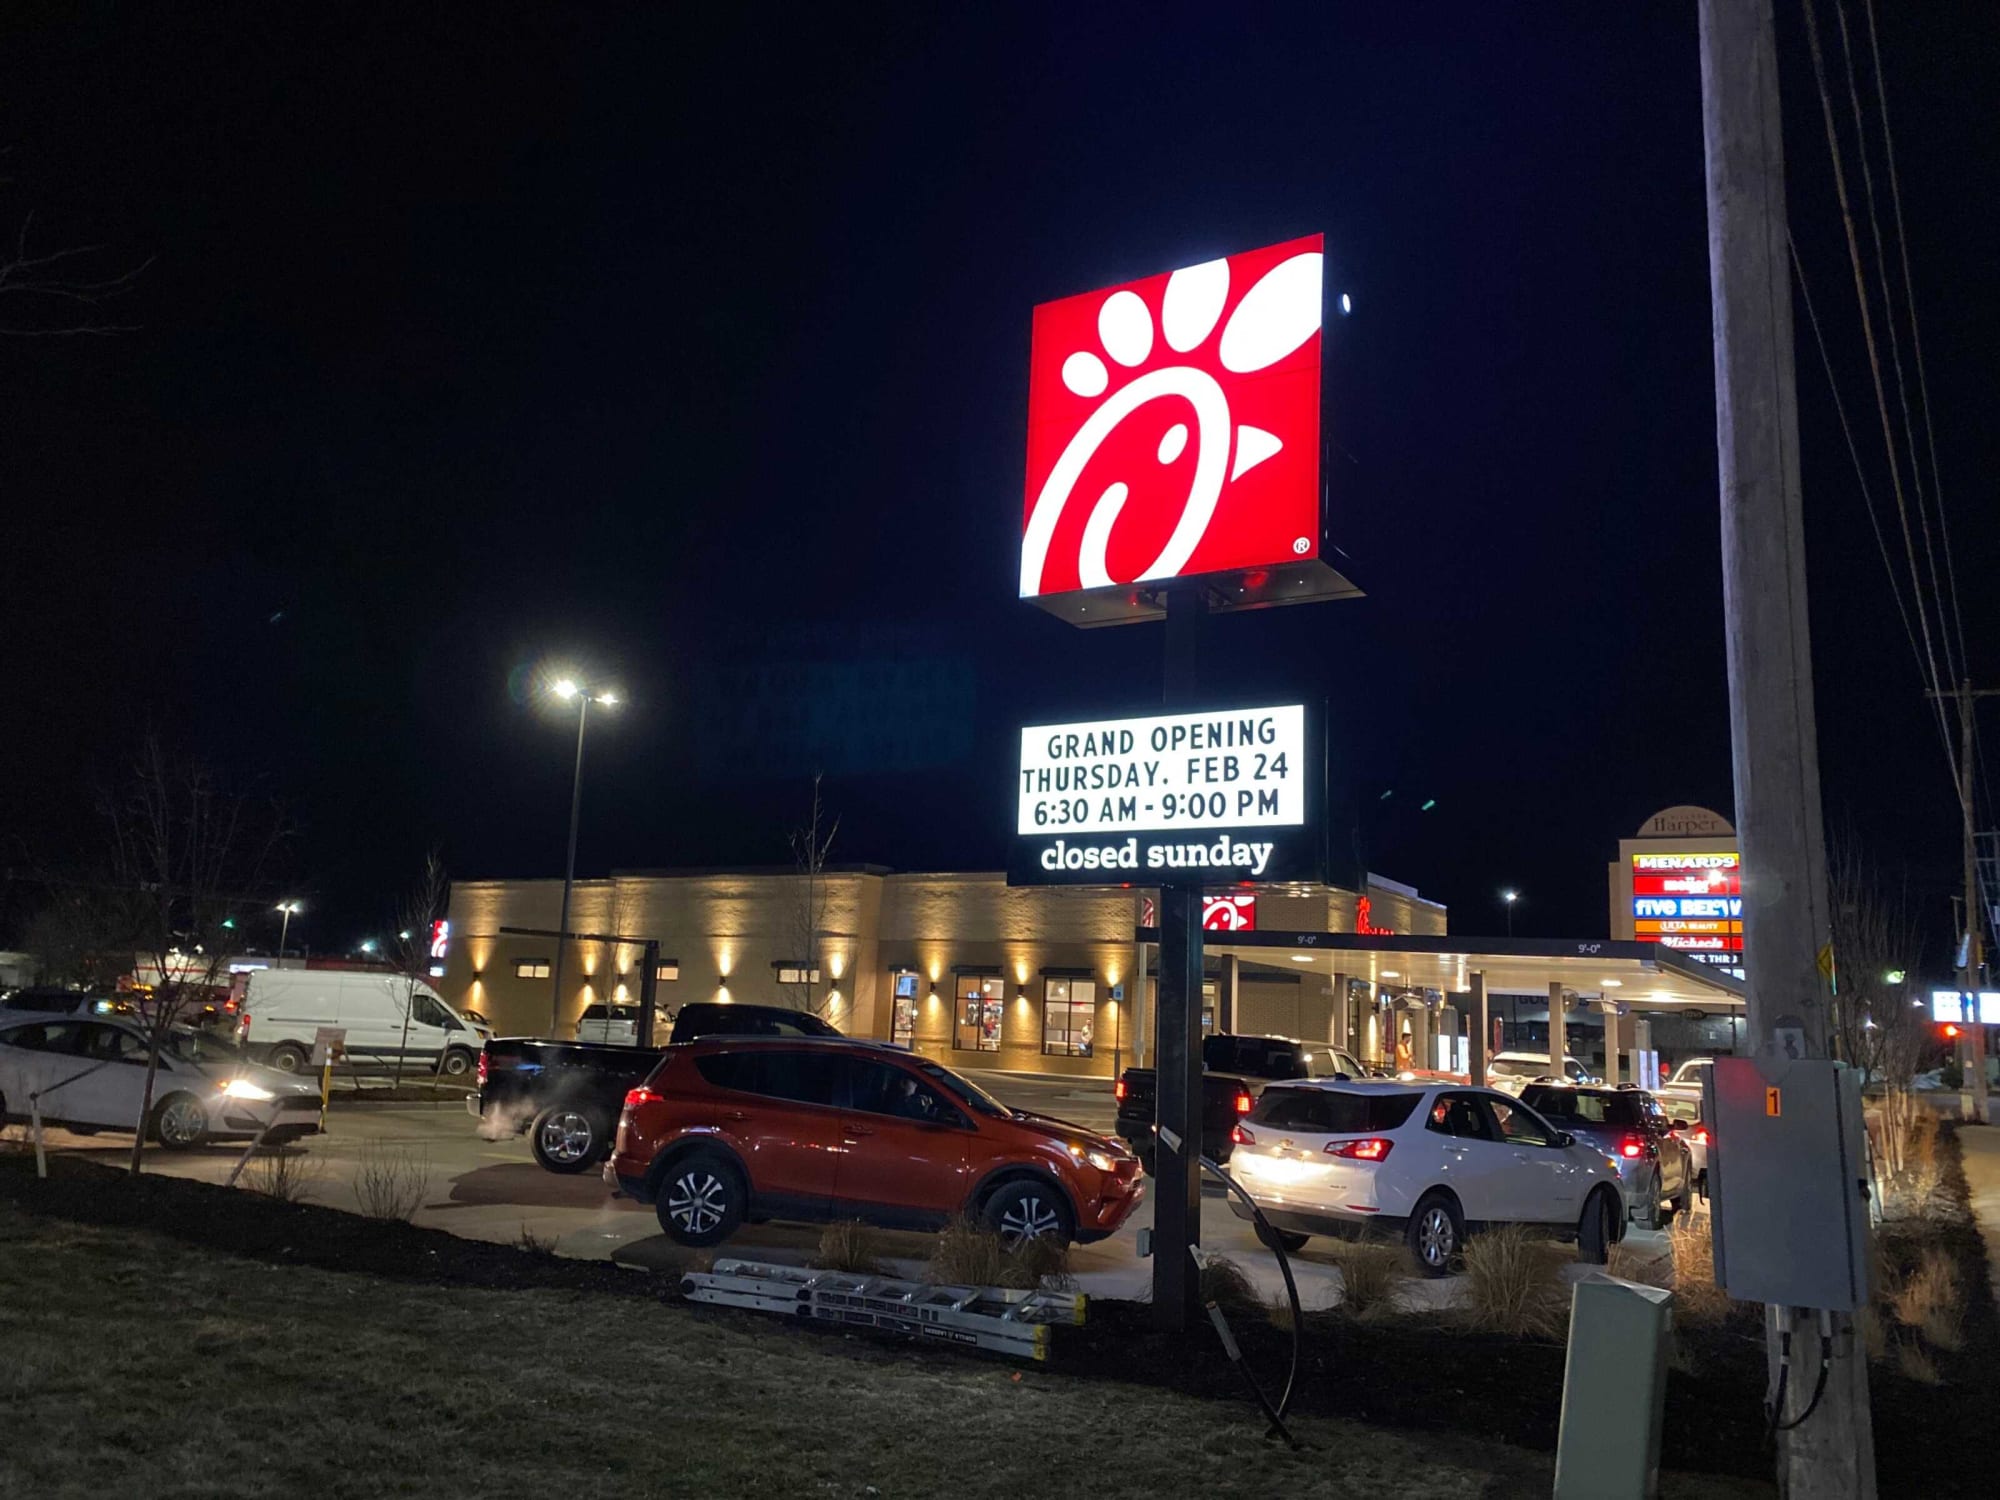 Photo of Chick-fil-A Juneteenth hours: Is Chick-fil-A open on Juneteenth? [Updated June 2022]